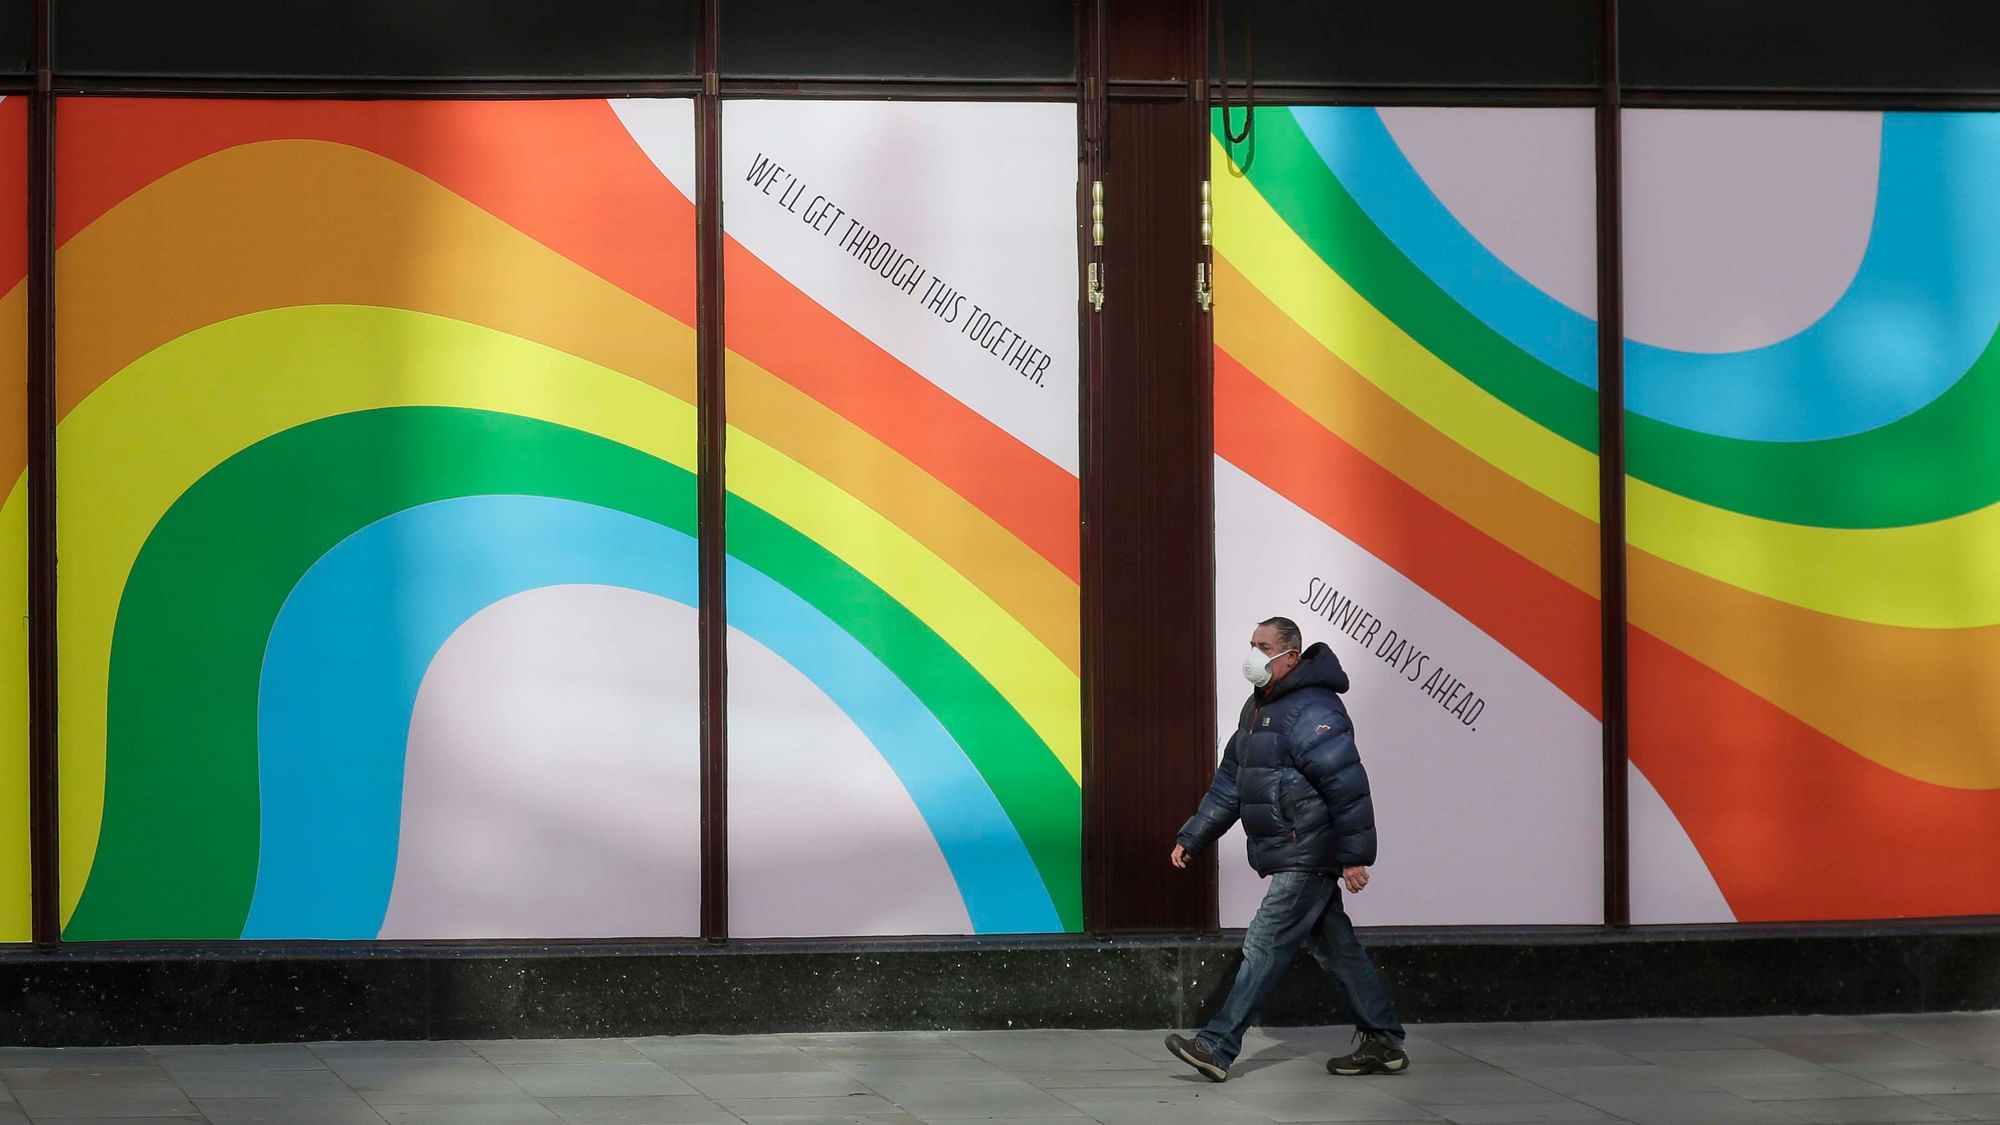 A man wearing a face mask to protect against catching the coronavirus walks past a window display of rainbows in the windows of the famous London department store Harrods in London, Tuesday, 31 March, 2020.&nbsp;